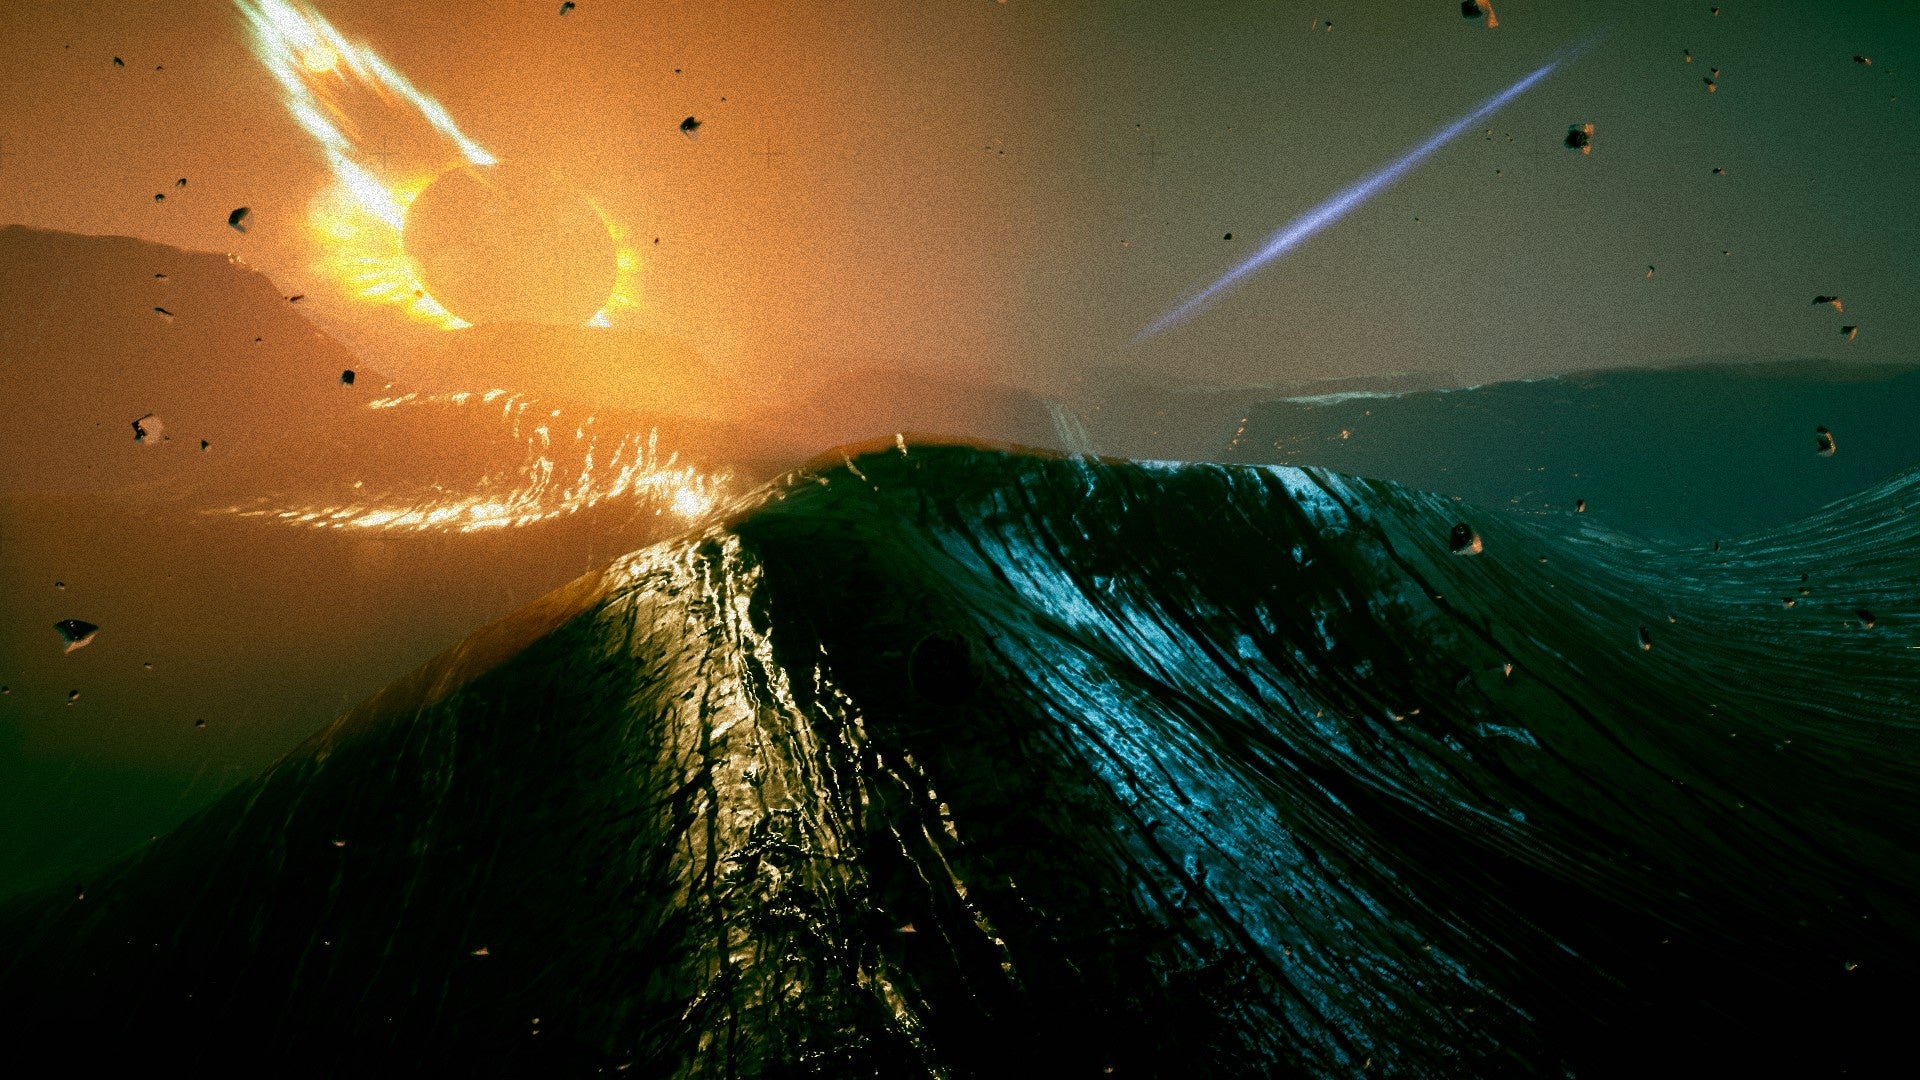 An Exo One screenshot showing what looks like a planet made of slick, molten rock, with a possible planet possibly exploding in the distance.